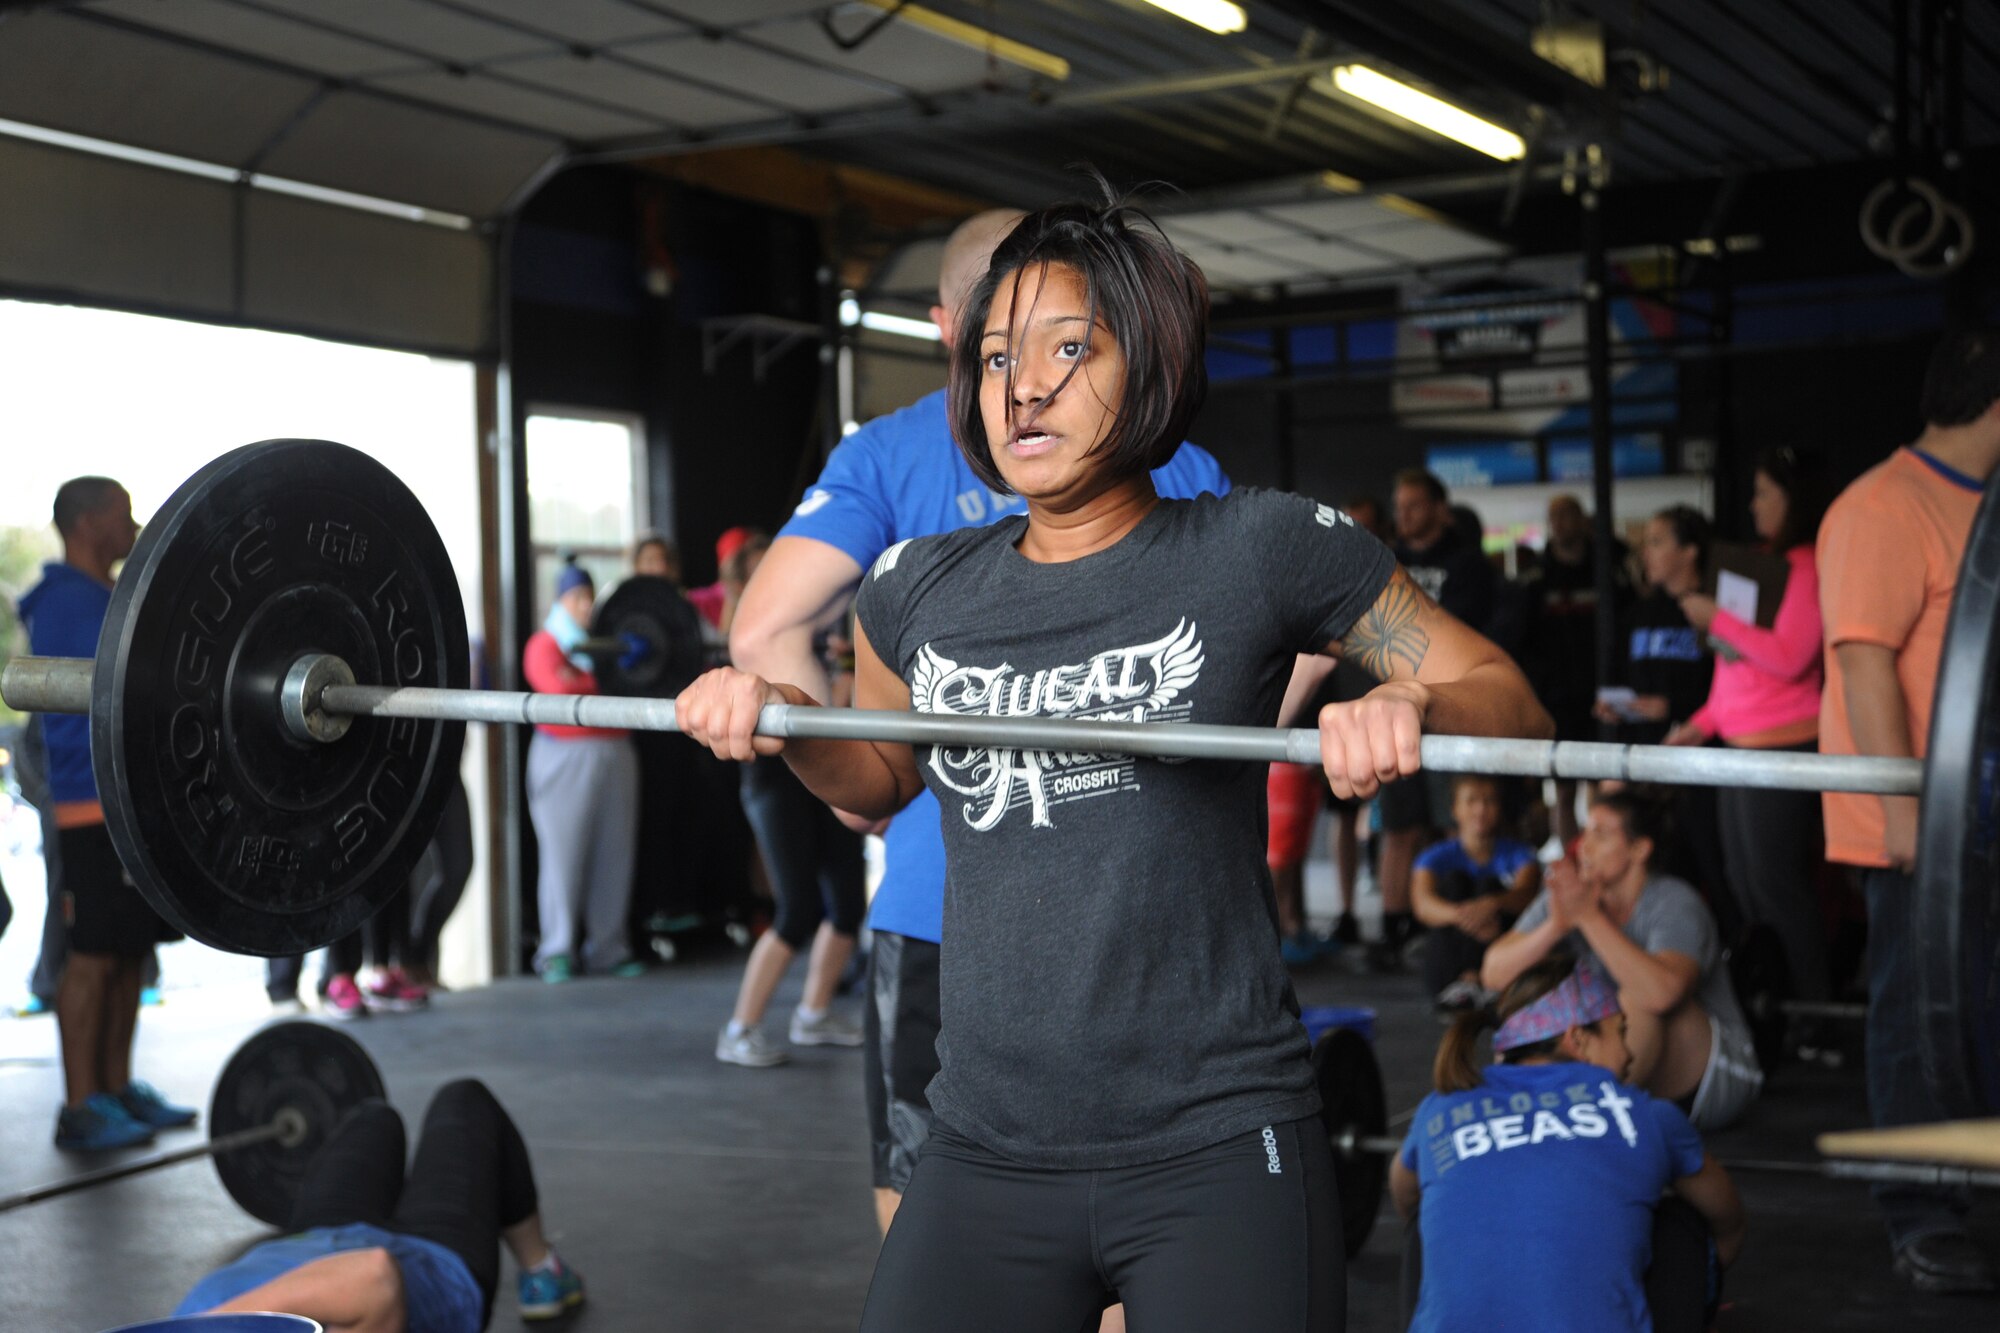 Senior Airman Nikki Mitchell, 436th Dental Squadron dental assistant, performs a hang clean during the second event of the Eastern Shore Affiliate Challenge Oct. 17, 2015, in Georgetown, Del. One of the best parts of the competition for Mitchell was pushing herself to her limits and cheering on her teammates. (U.S. Air Force photo/Staff Sgt. Elizabeth Morris)